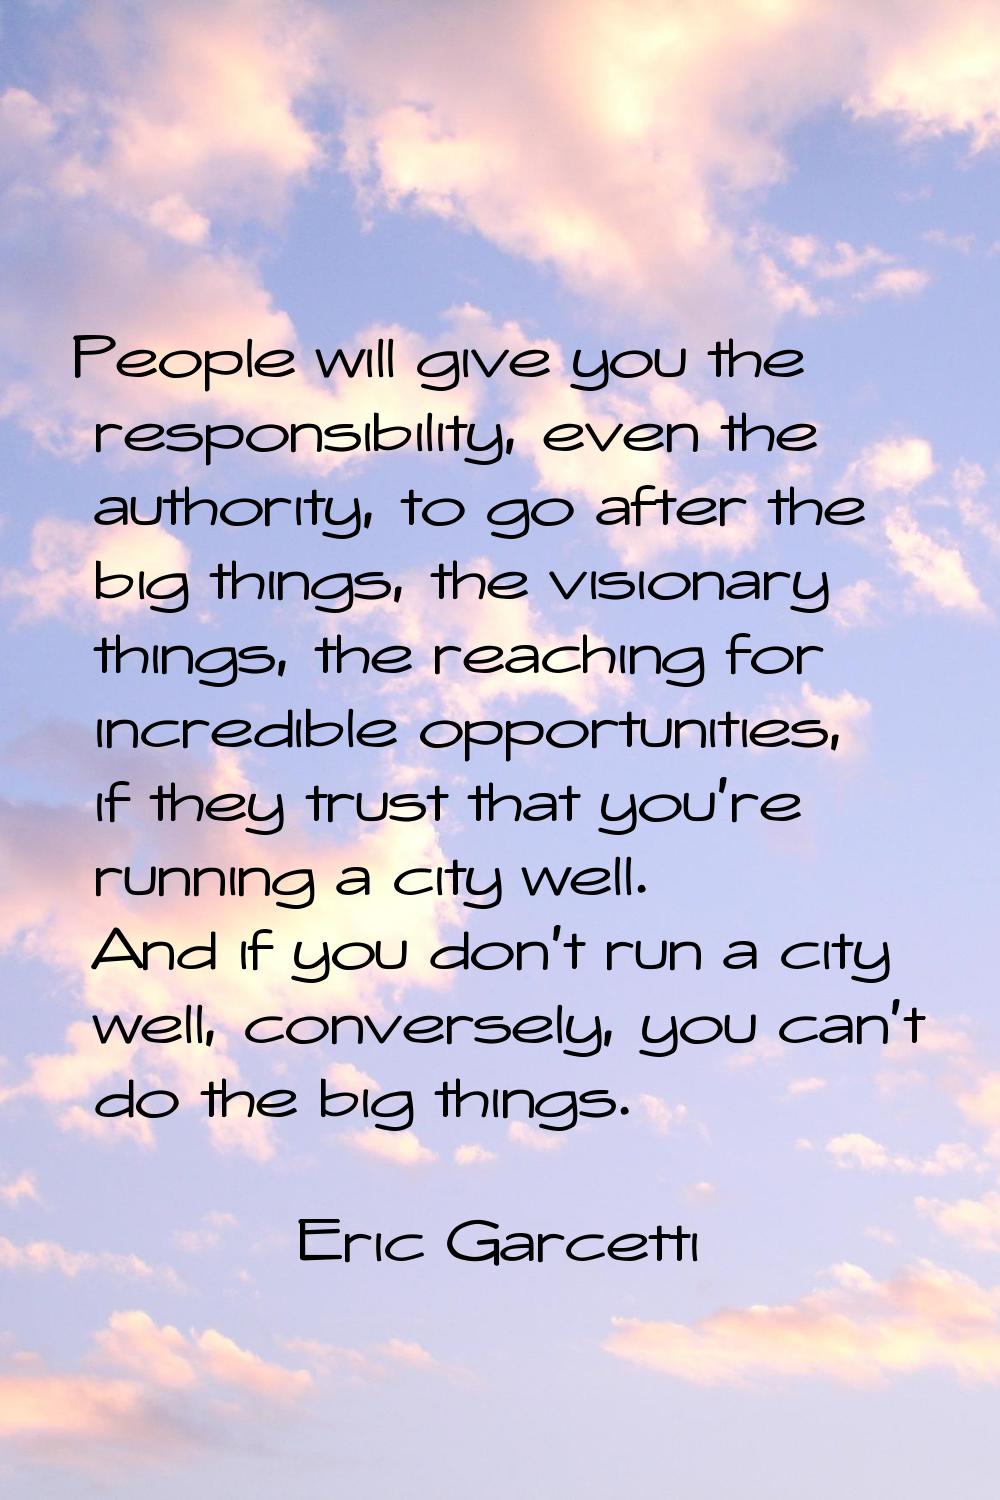 People will give you the responsibility, even the authority, to go after the big things, the vision